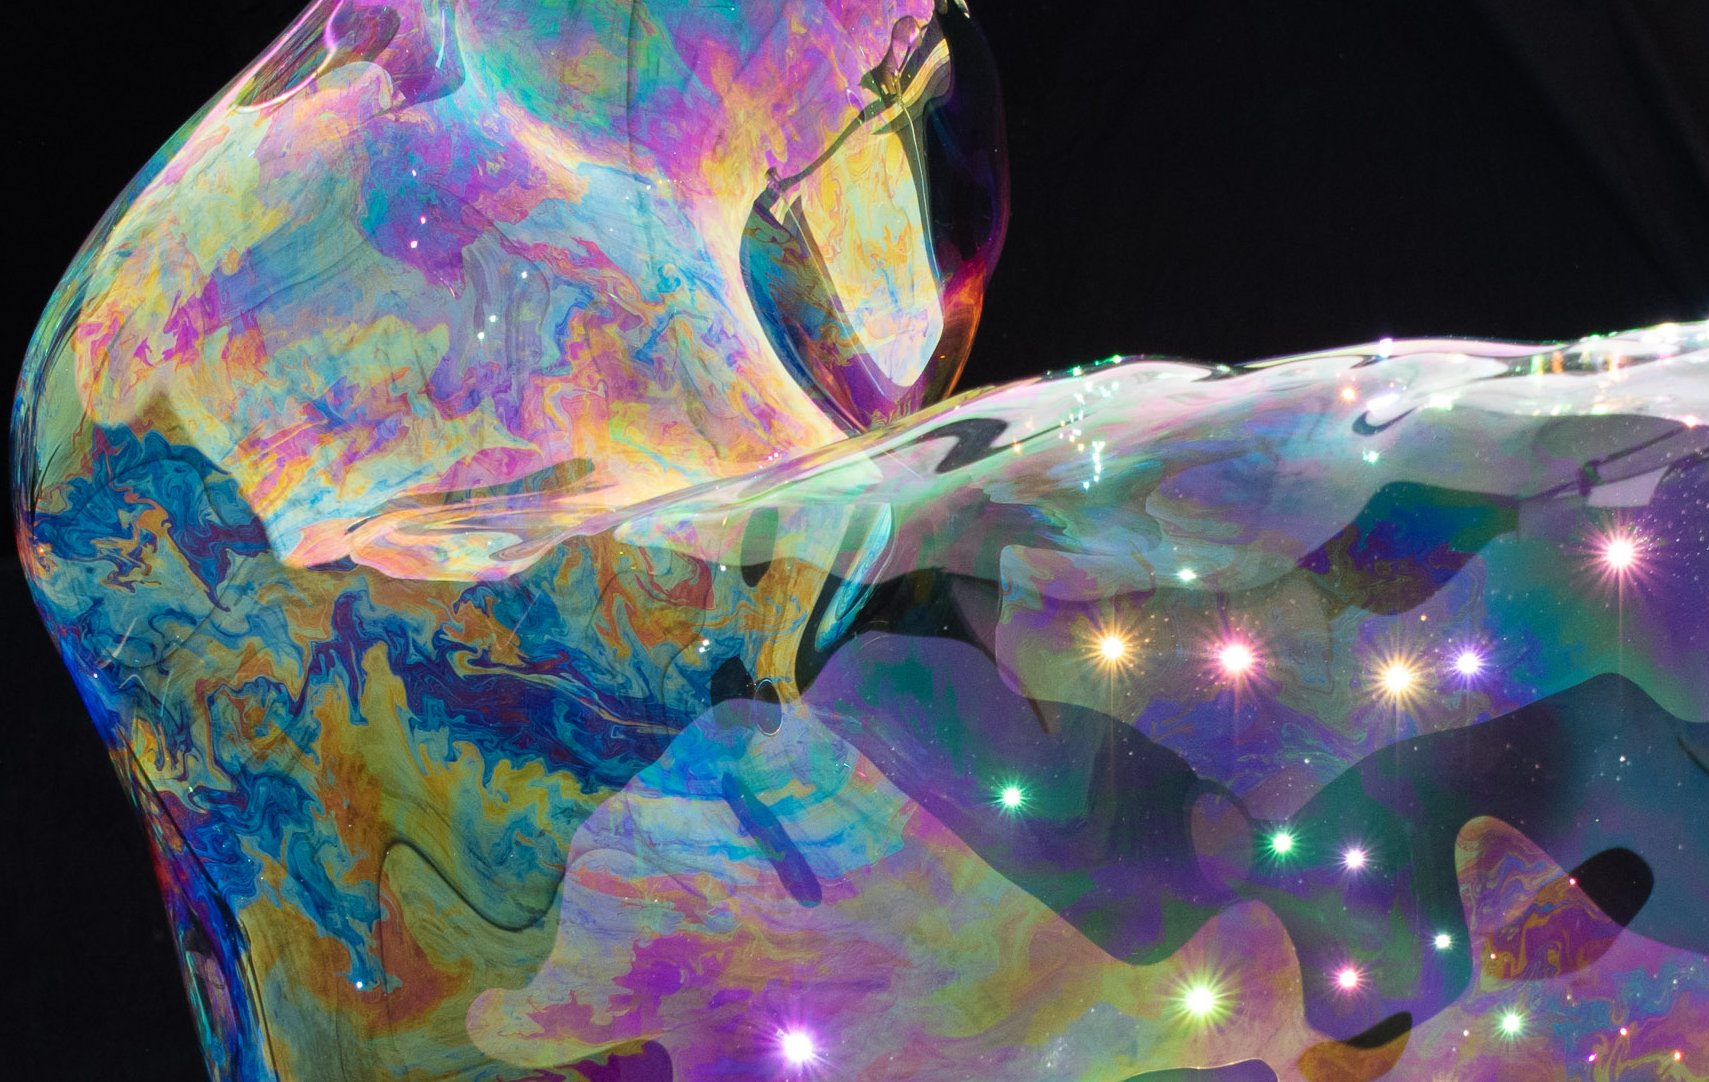 Can bubbles be art?